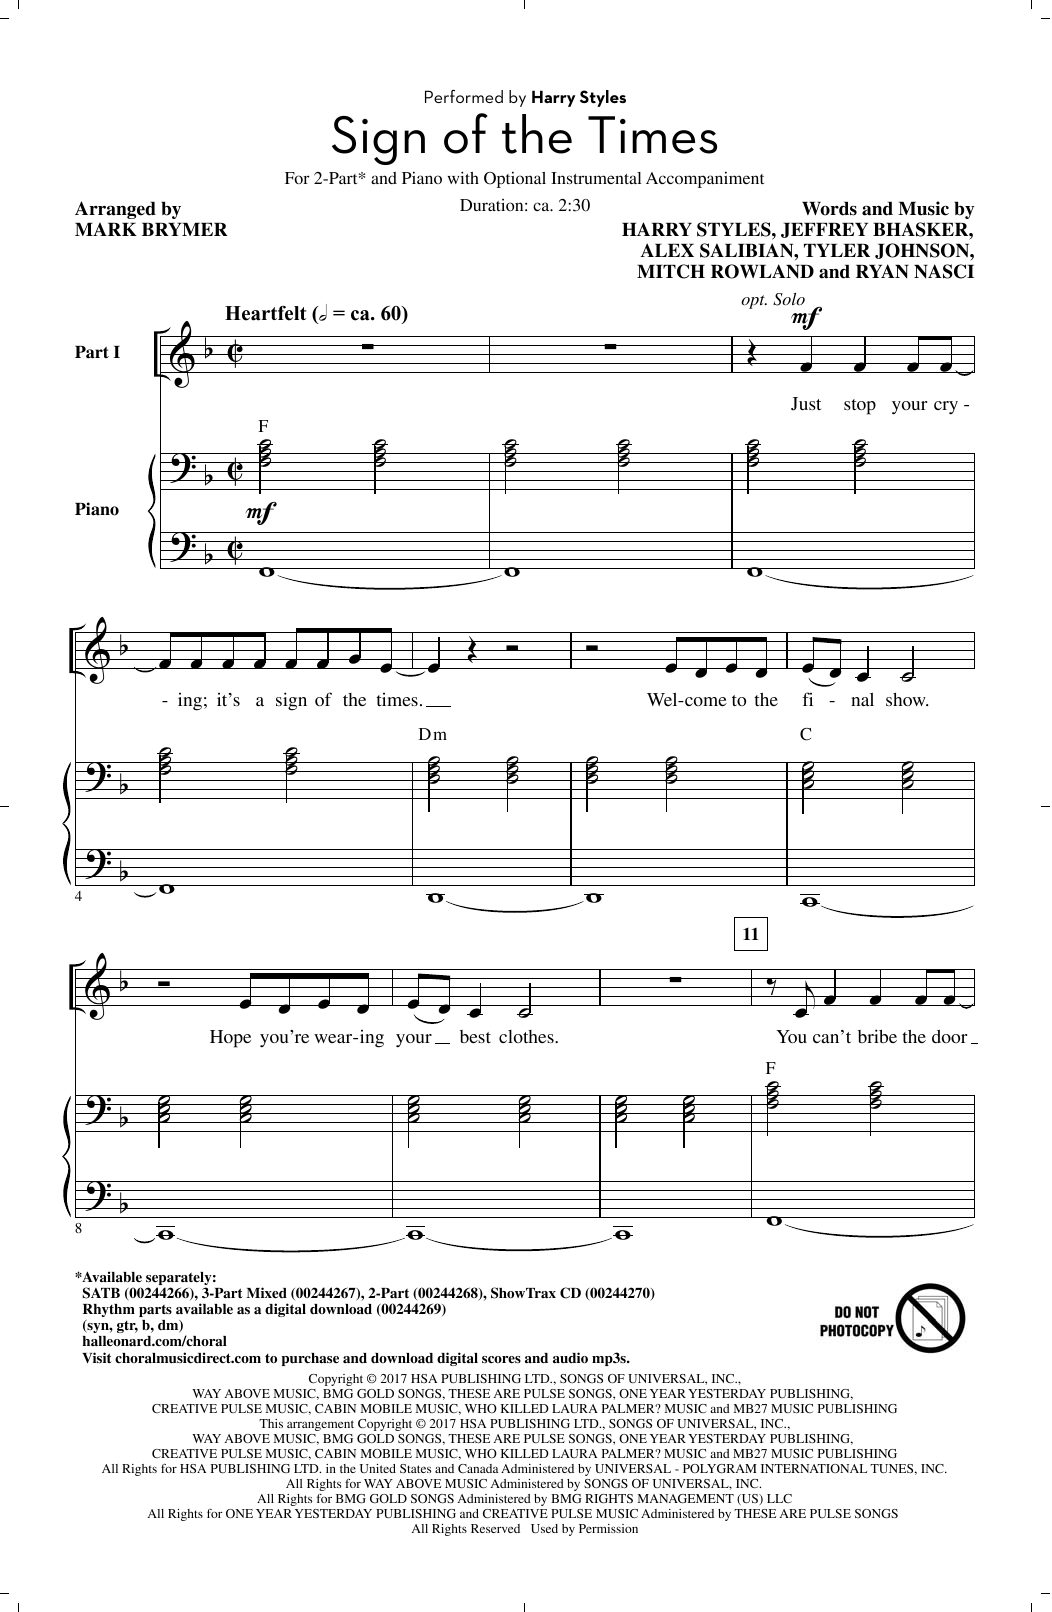 Mark Brymer Sign Of The Times sheet music notes and chords. Download Printable PDF.